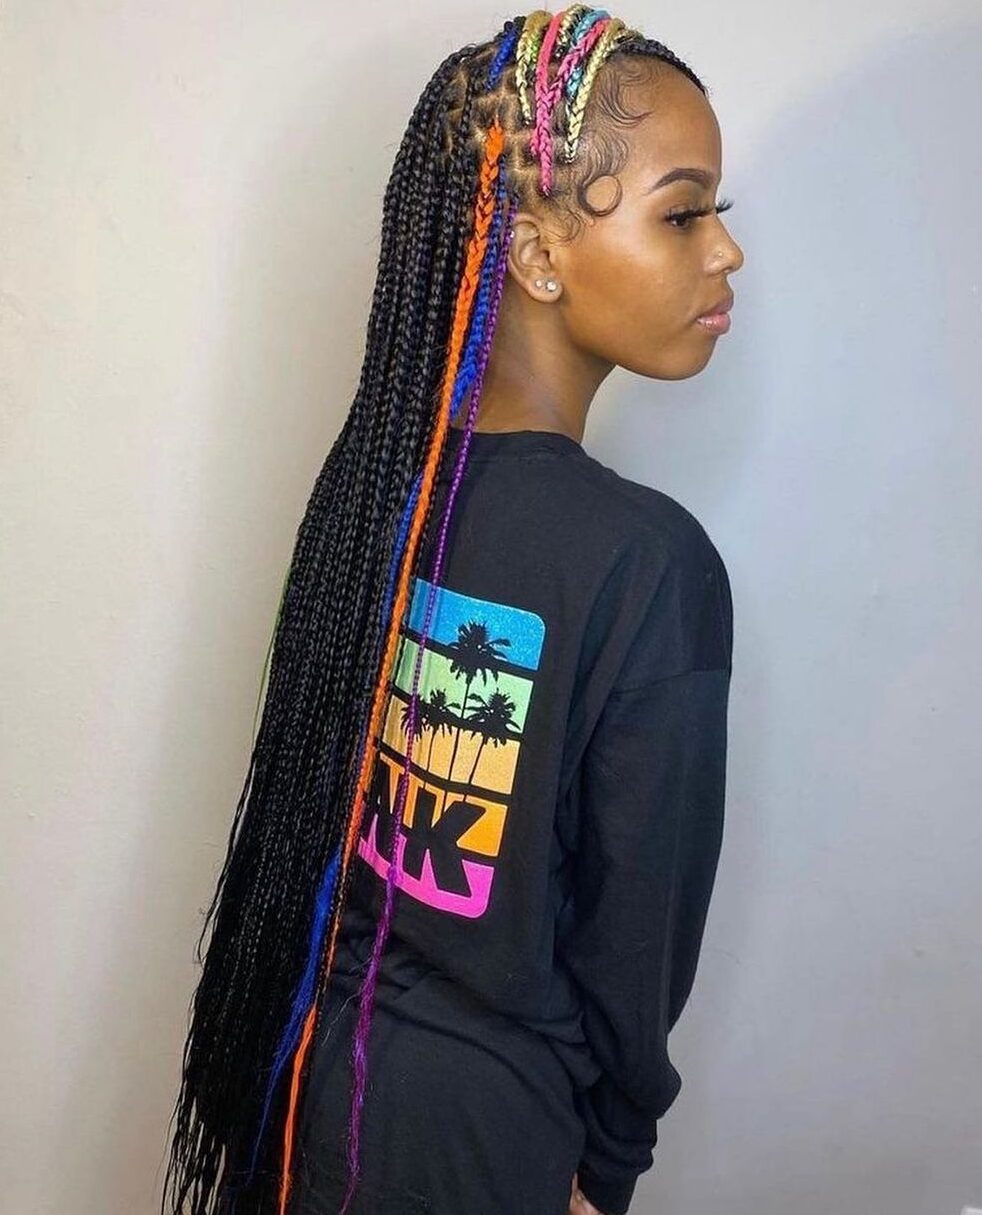 Latest Hairstyles For Ladies In Nigeria: 50+ Pictures